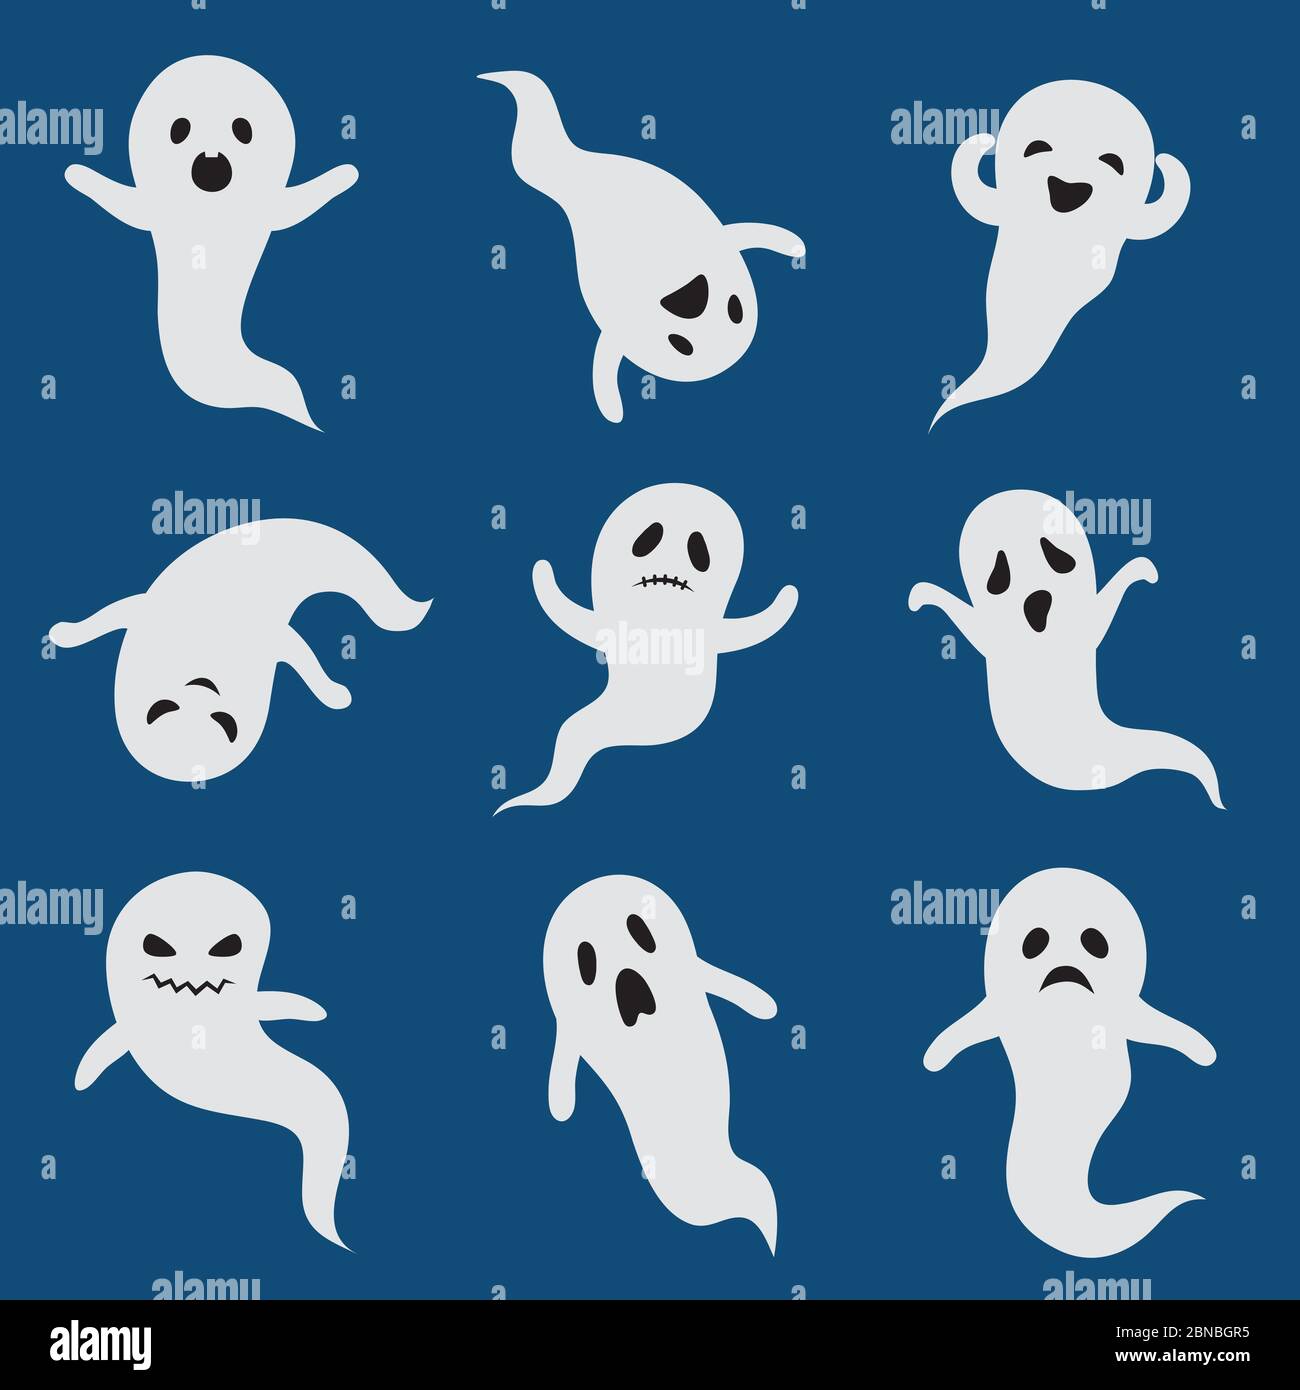 Scary ghosts. Cute halloween ghost. White silhouette vector boohoo ghostly characters isolated. Cartoon ghost halloween, scary silhouette ghostly illustration Stock Vector